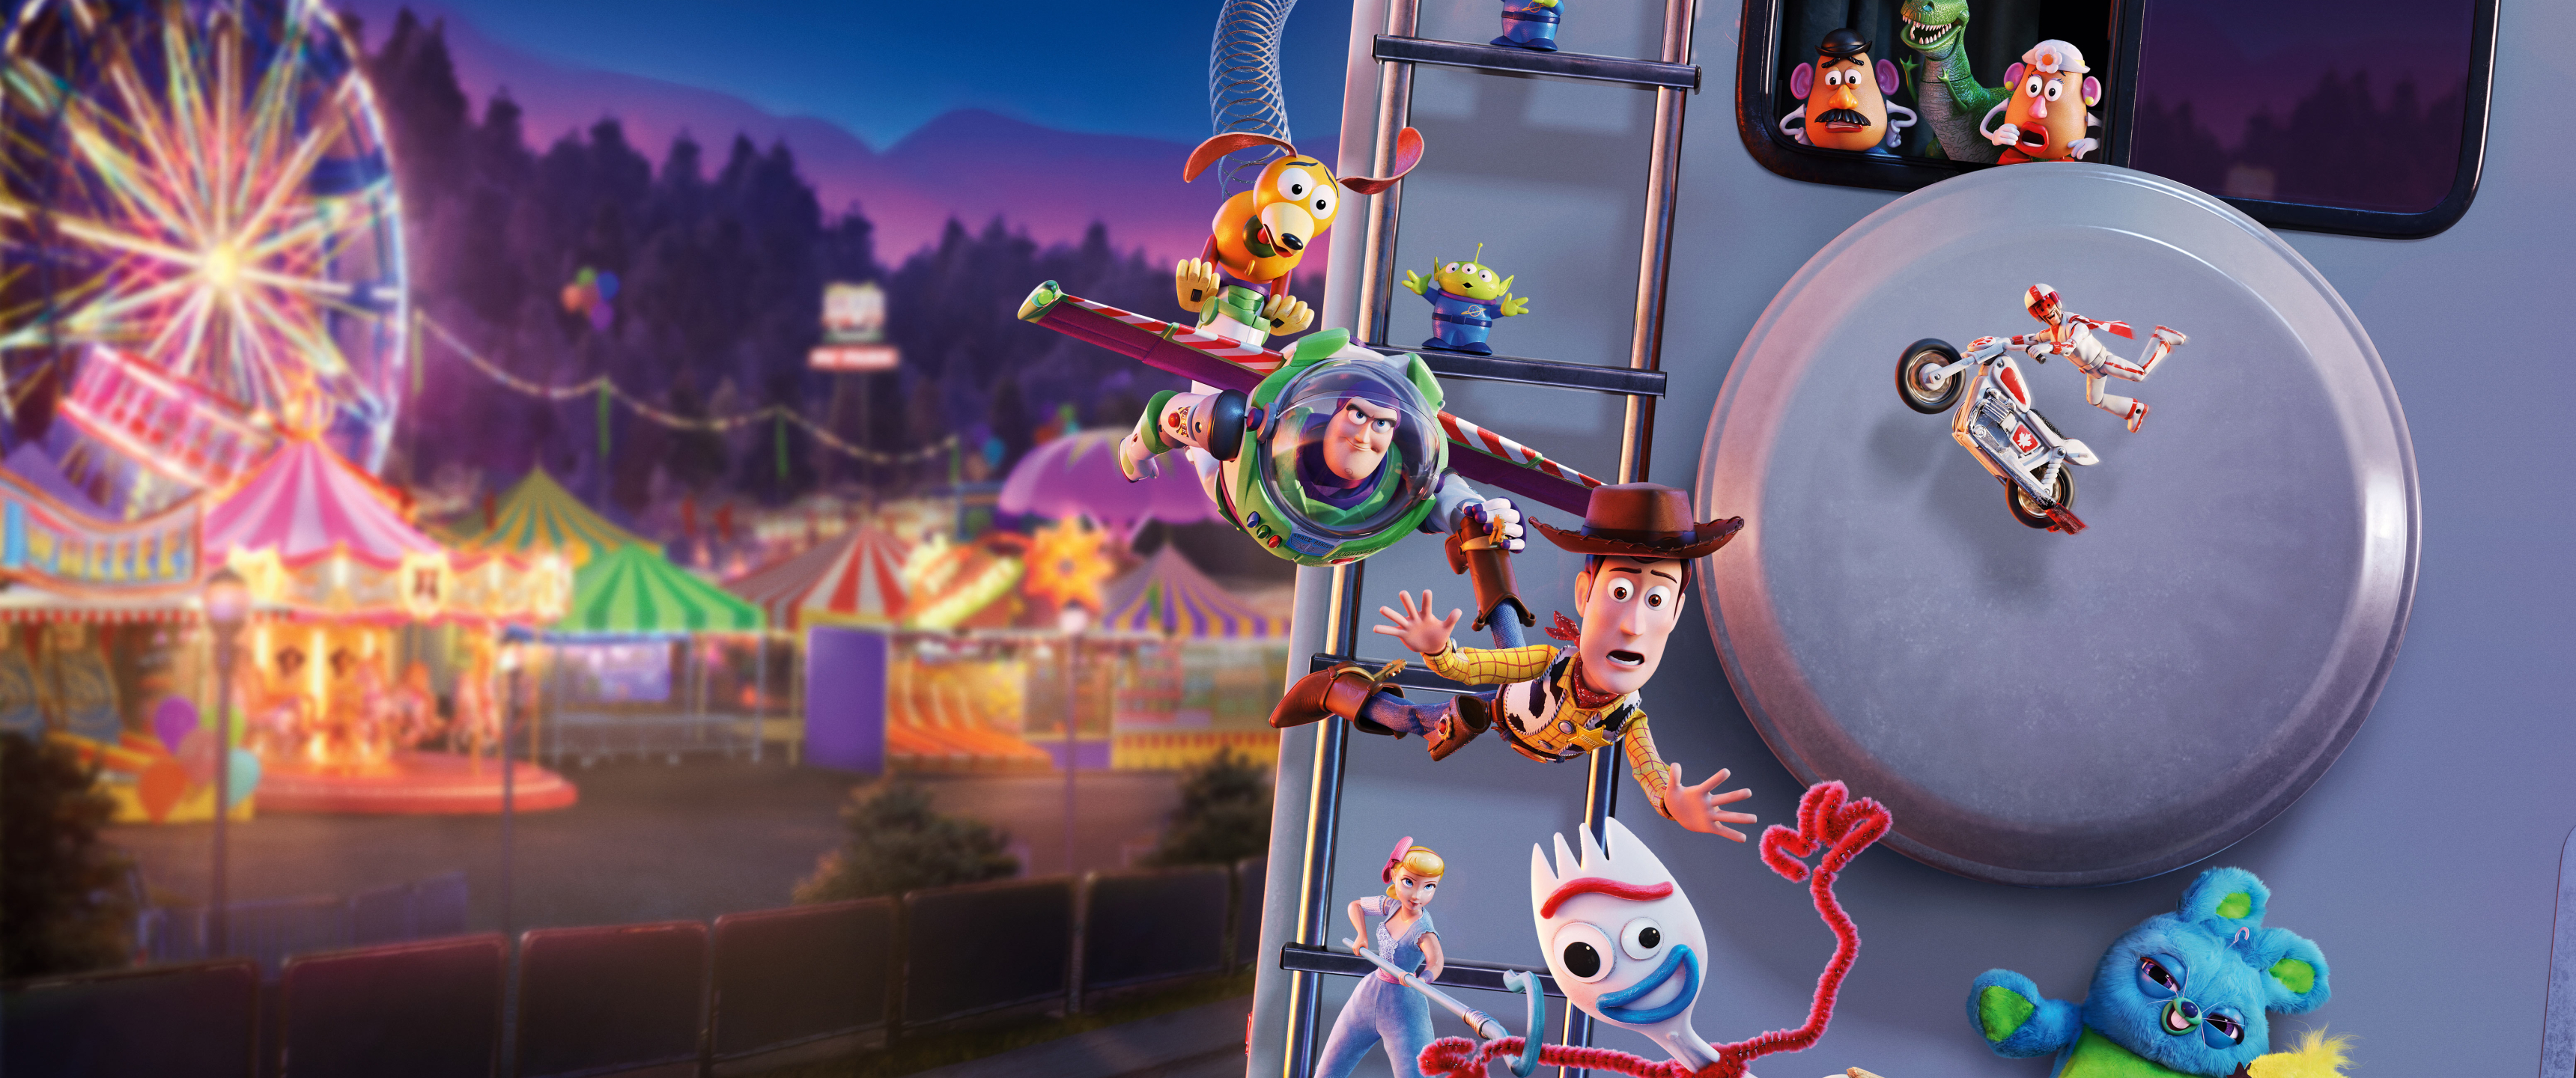 3440x1440 New Toy Story 4 Poster 3440x1440 Resolution Wallpaper, HD Movies  4K Wallpapers, Images, Photos and Background - Wallpapers Den